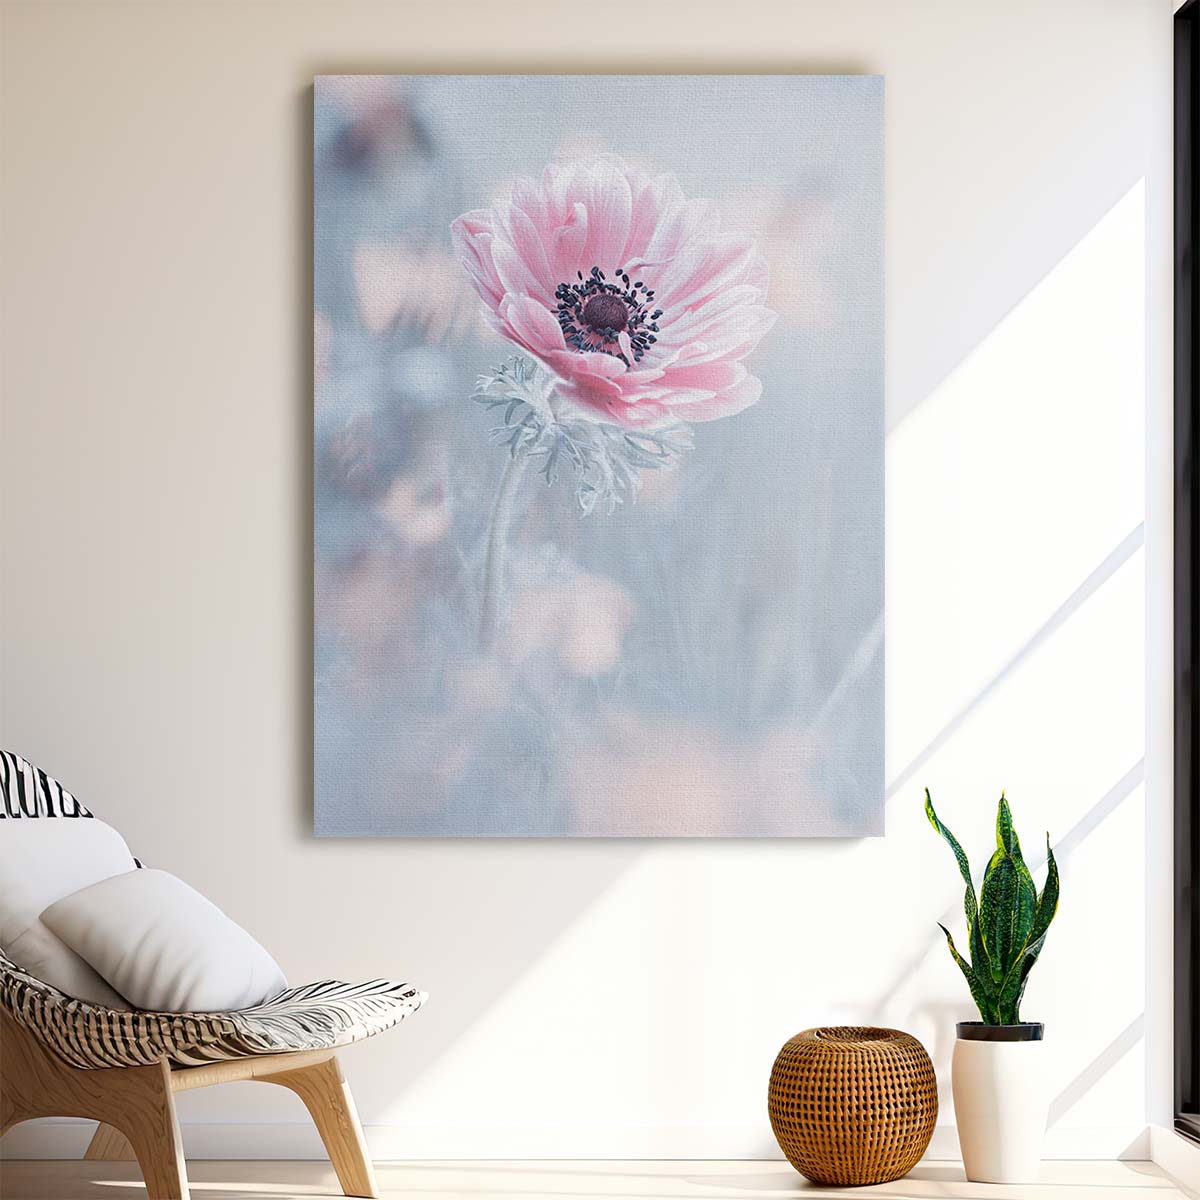 La Reine De Neiges Pastel Pink Macro Floral Photography Wall Art by Luxuriance Designs, made in USA